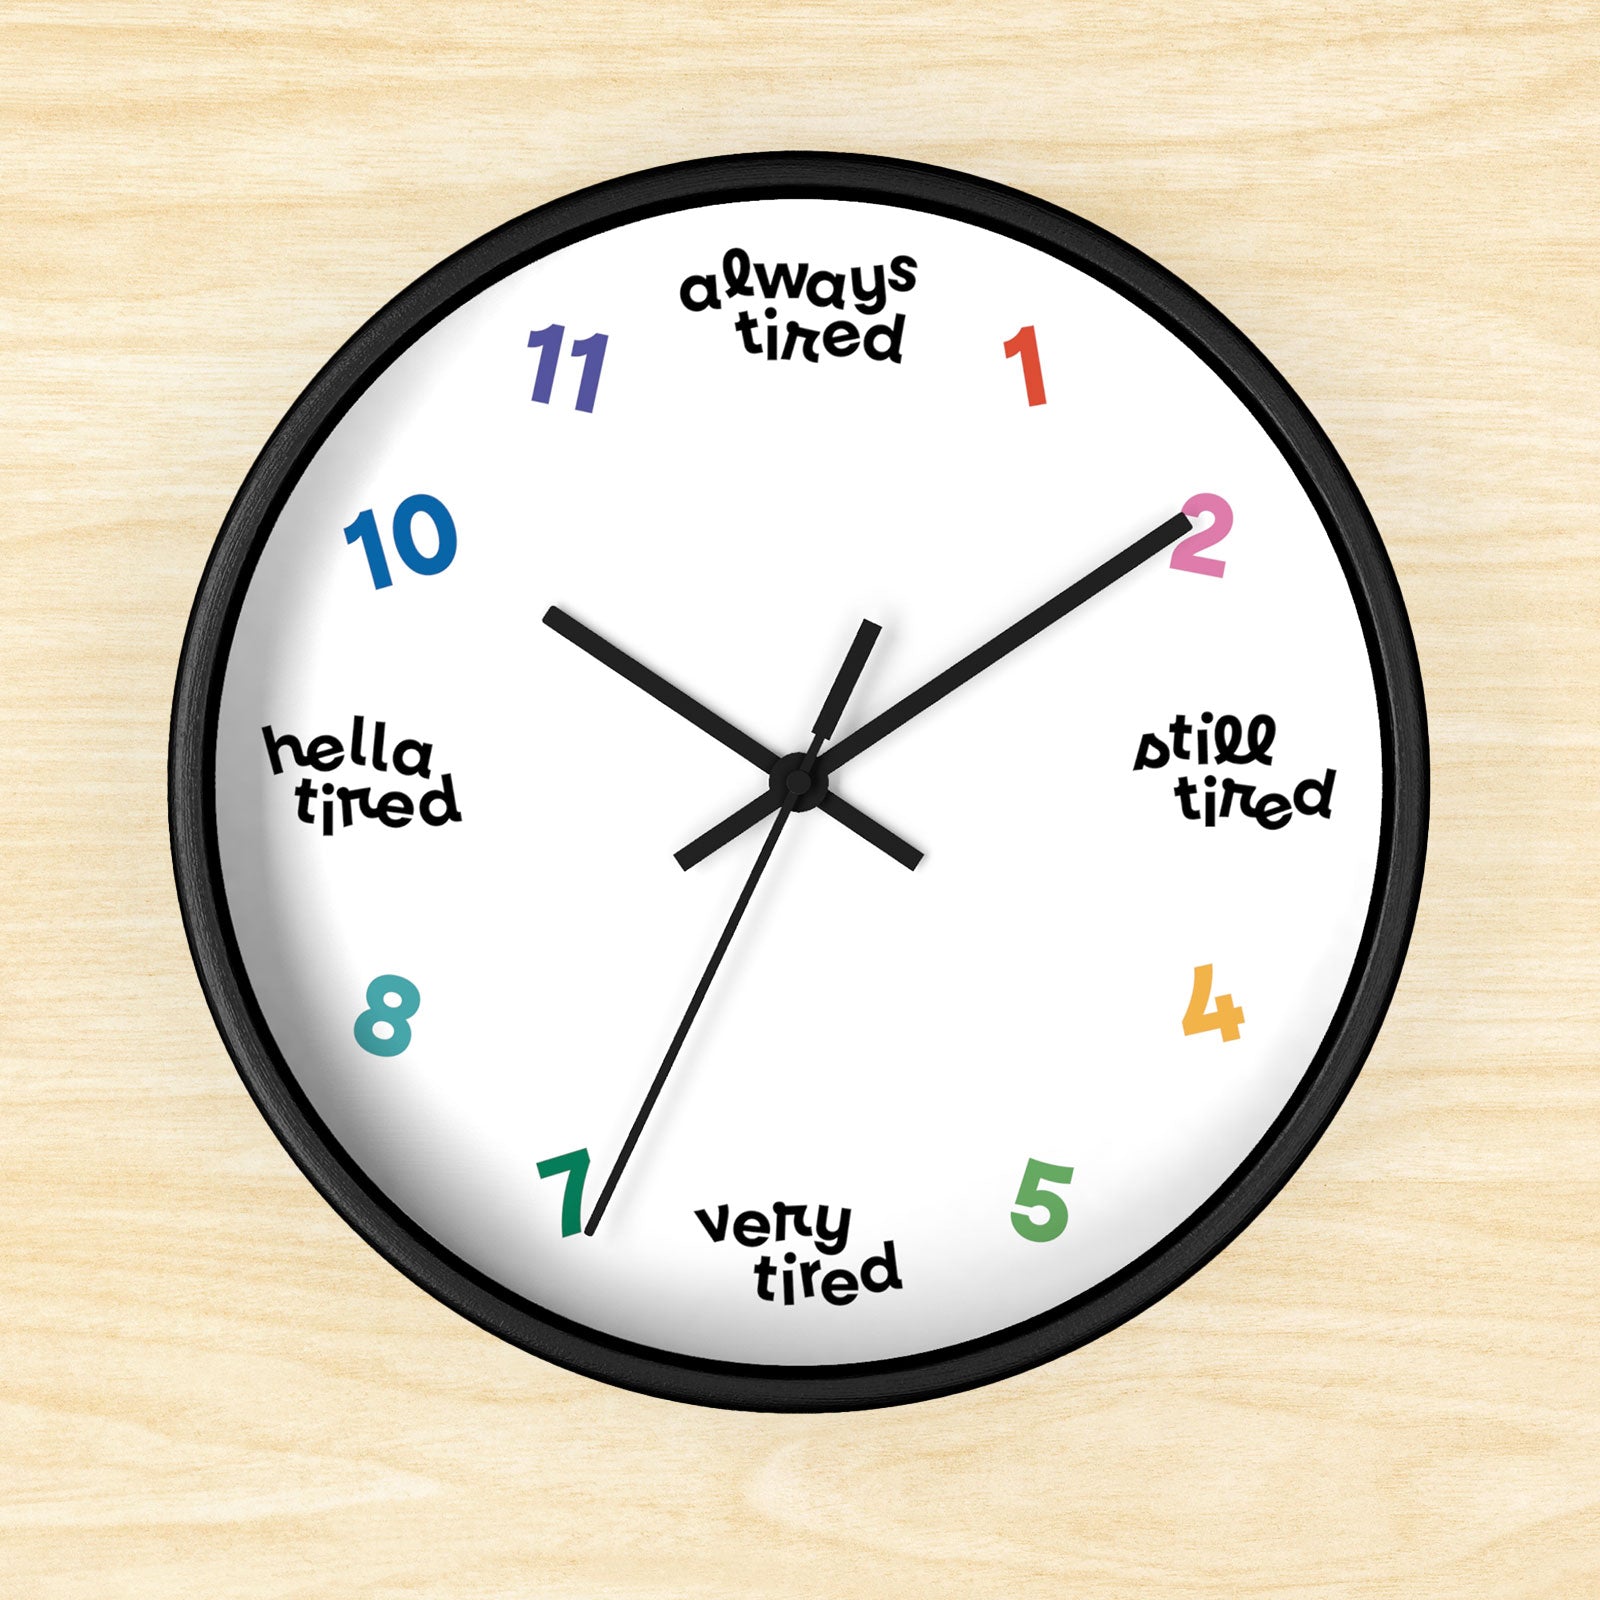 Hanging wall clock with a swedish minimal design. On 4 quadrants, there are variations of "tired" instead of the hour markers. The remaining numbers are cheerful bright colors. This clock has a black frame.